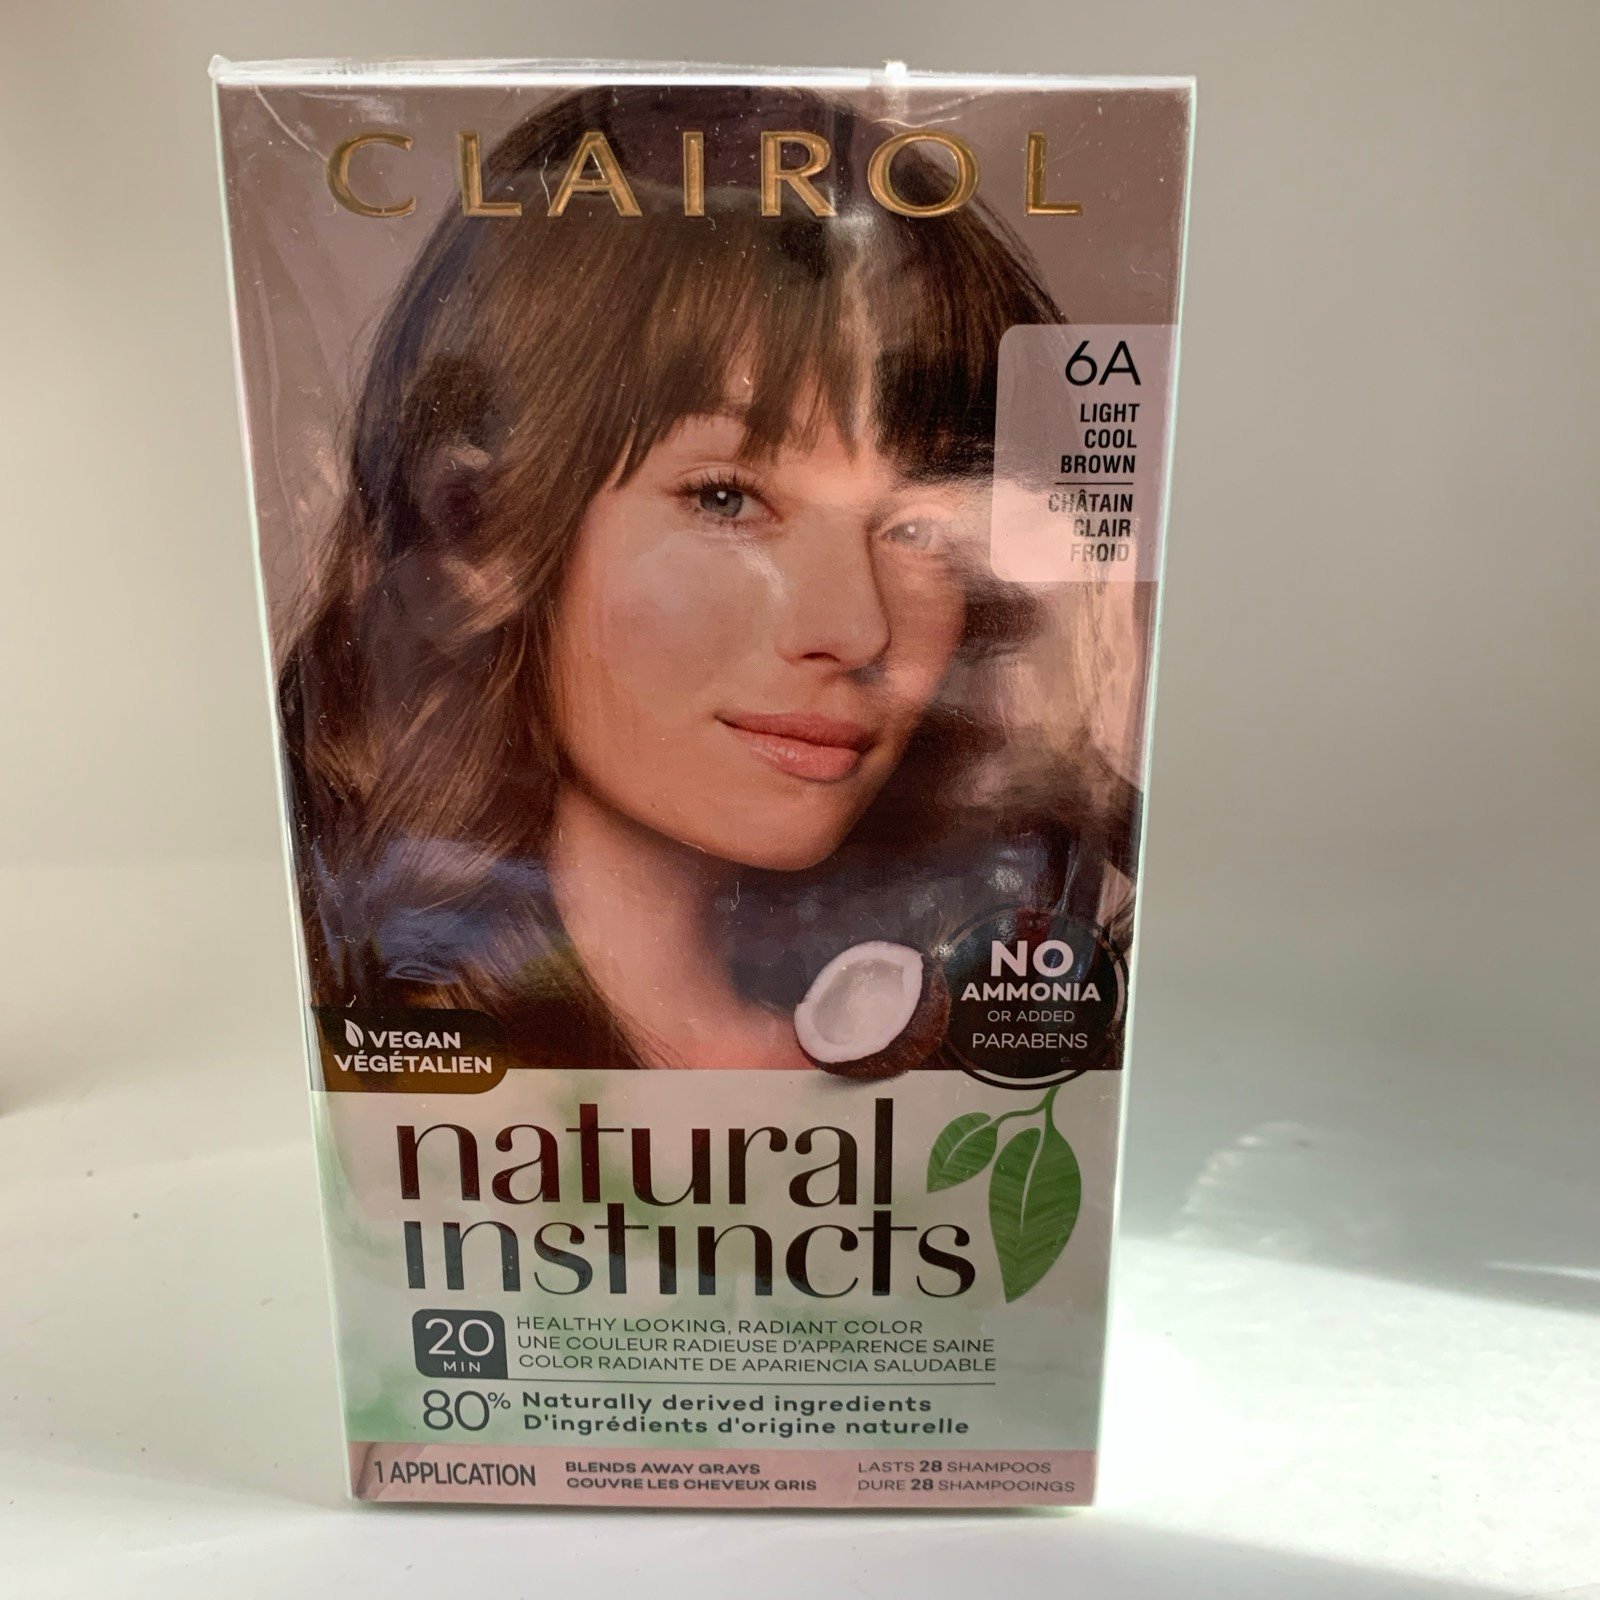 Hair Dye Natural Instincts Cool Light Brown 6A New in the package B8xAHKCdn